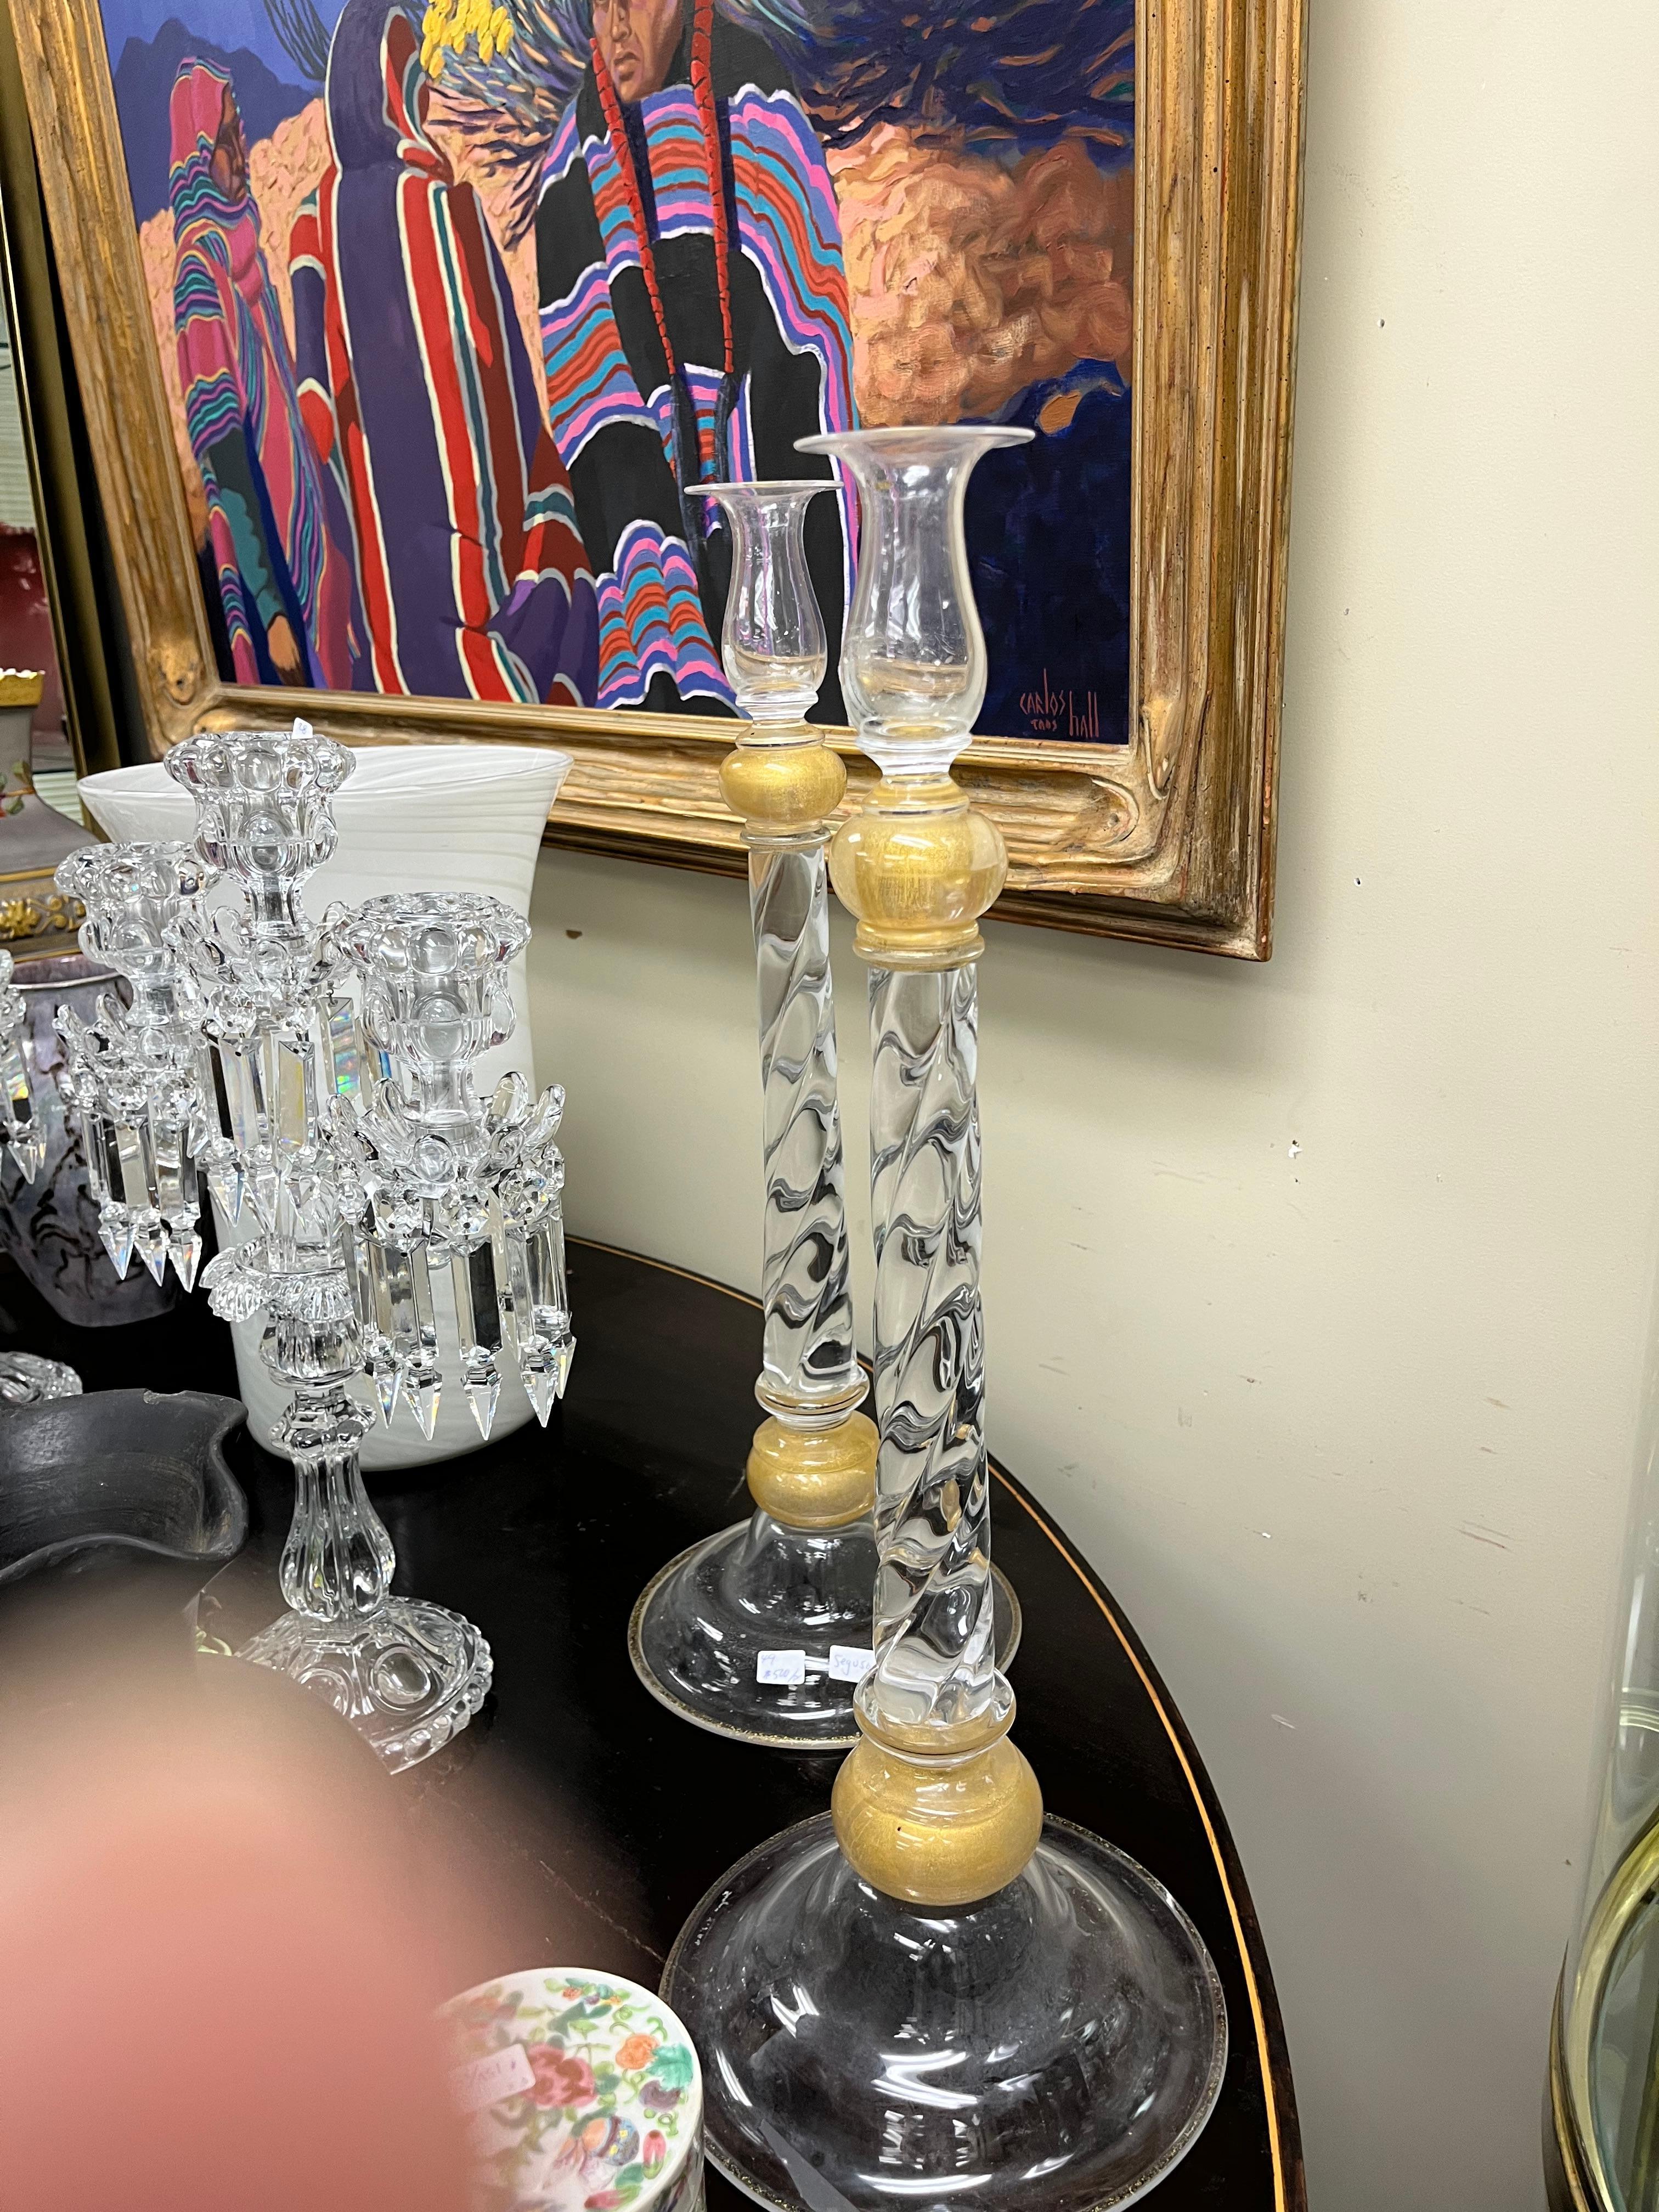 Pair of Mid Twentieth CenturyMurano Glass Candle Holders by Seguso Vetri d'Arte  In Good Condition For Sale In Chicago, IL